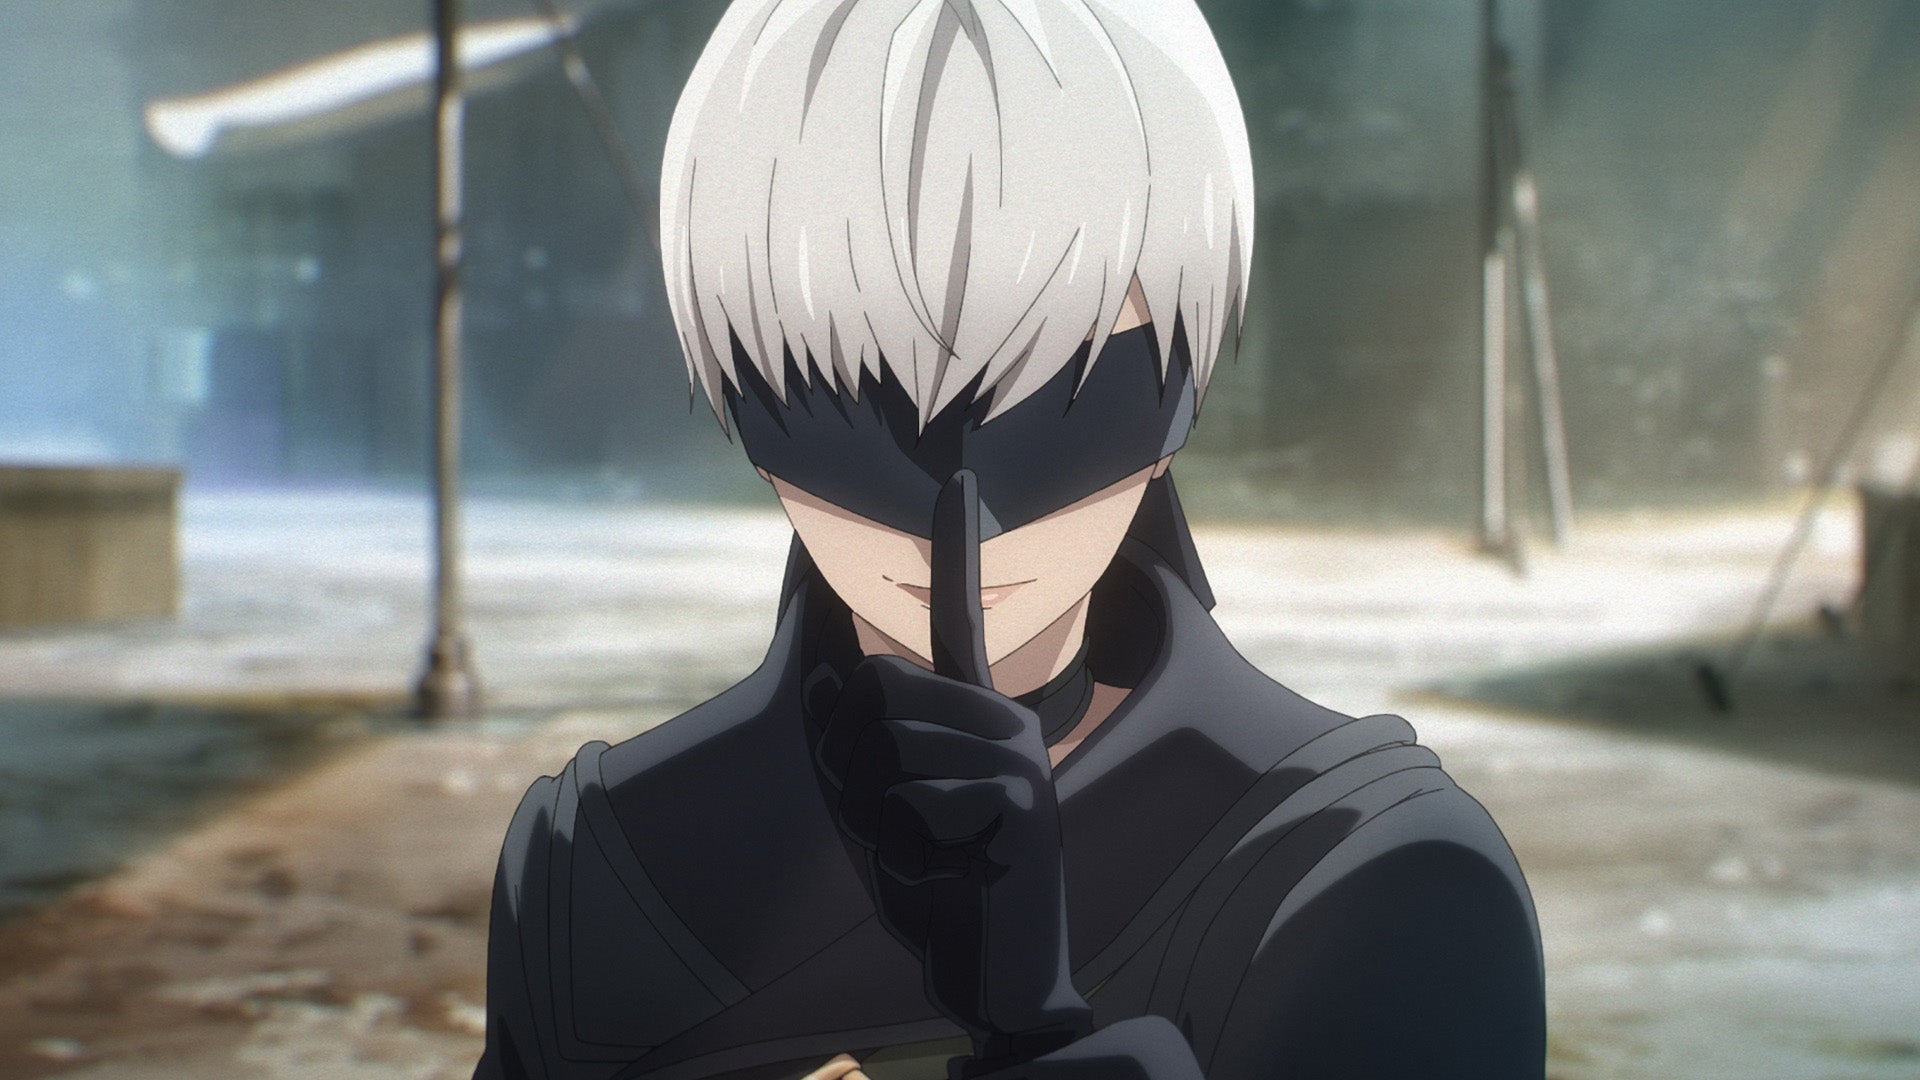 NieR Automata anime and game comparison videos show how Ver11a faithfully  recreates the games scenes  AUTOMATON WEST